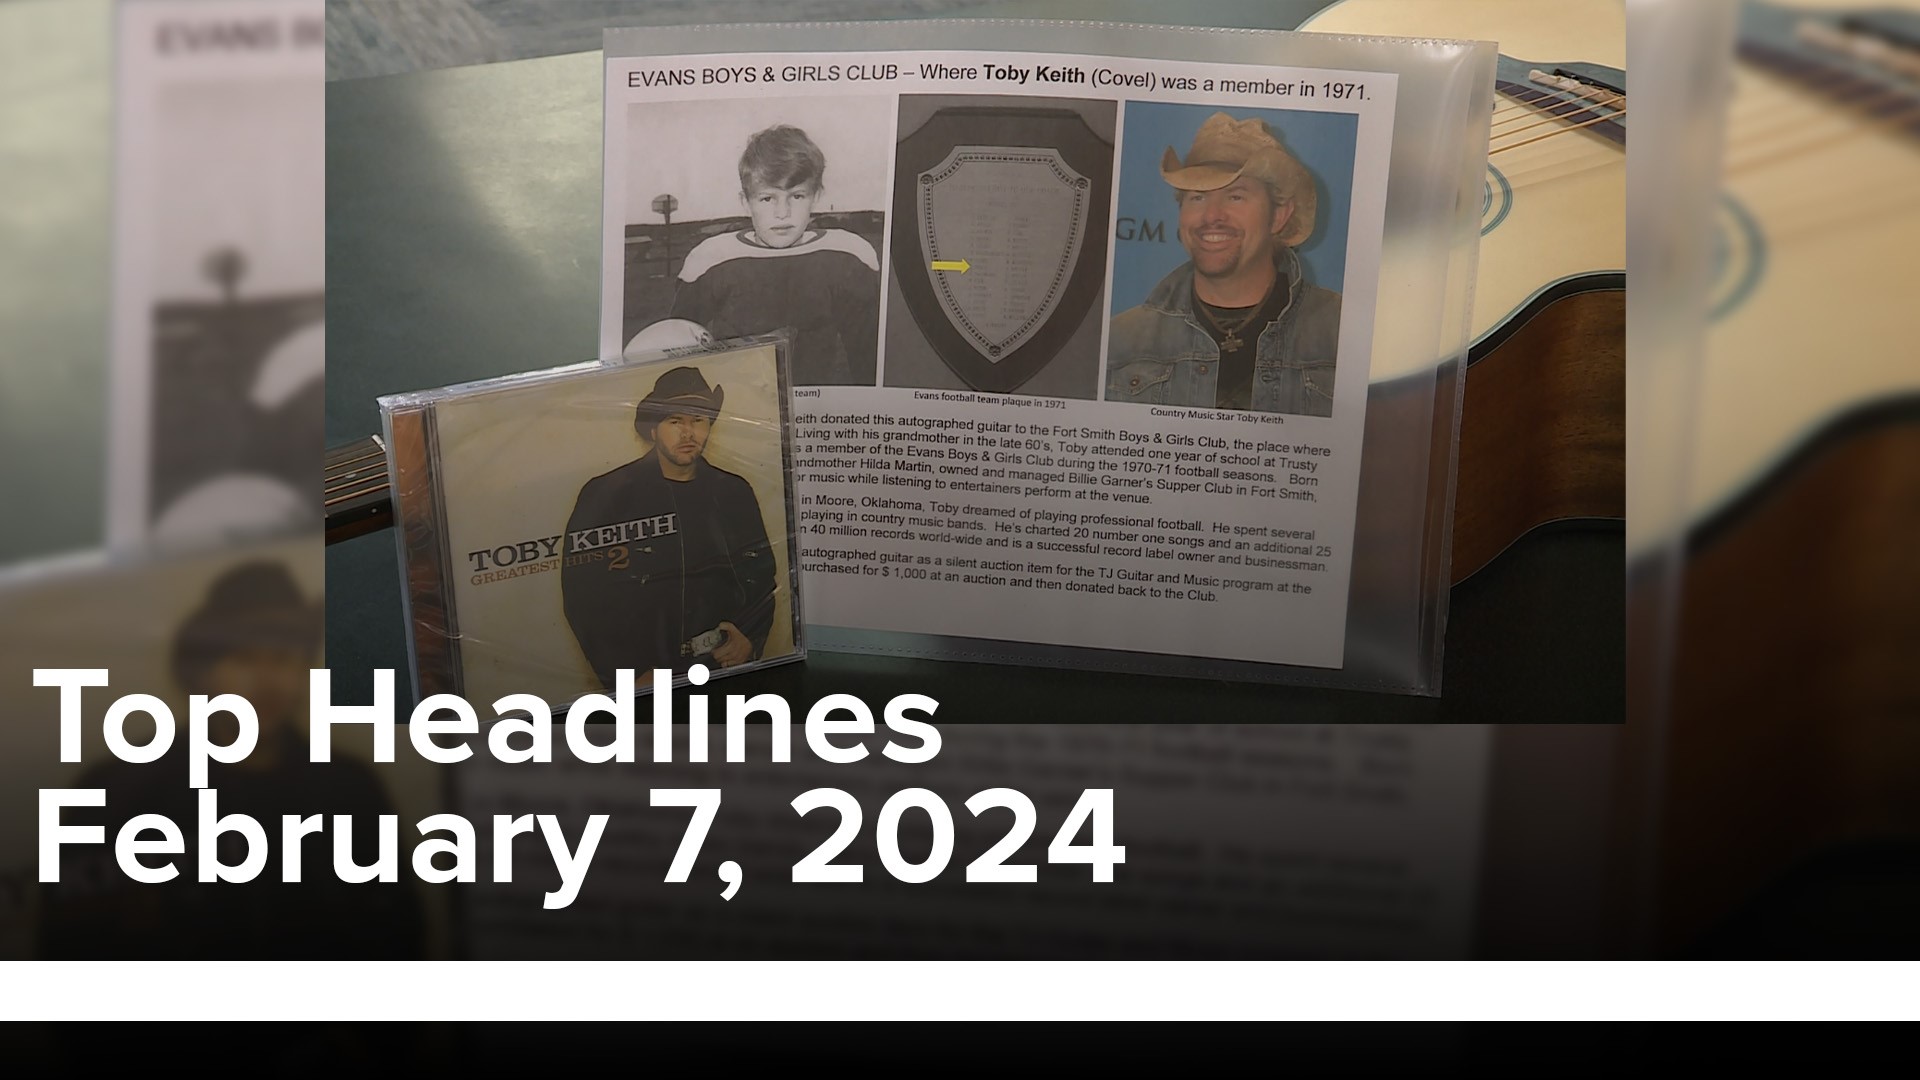 Watch 5NEWS Top Headlines and find out how close Toby Keith's ties to Arkansas are. This and more on your daily headlines.